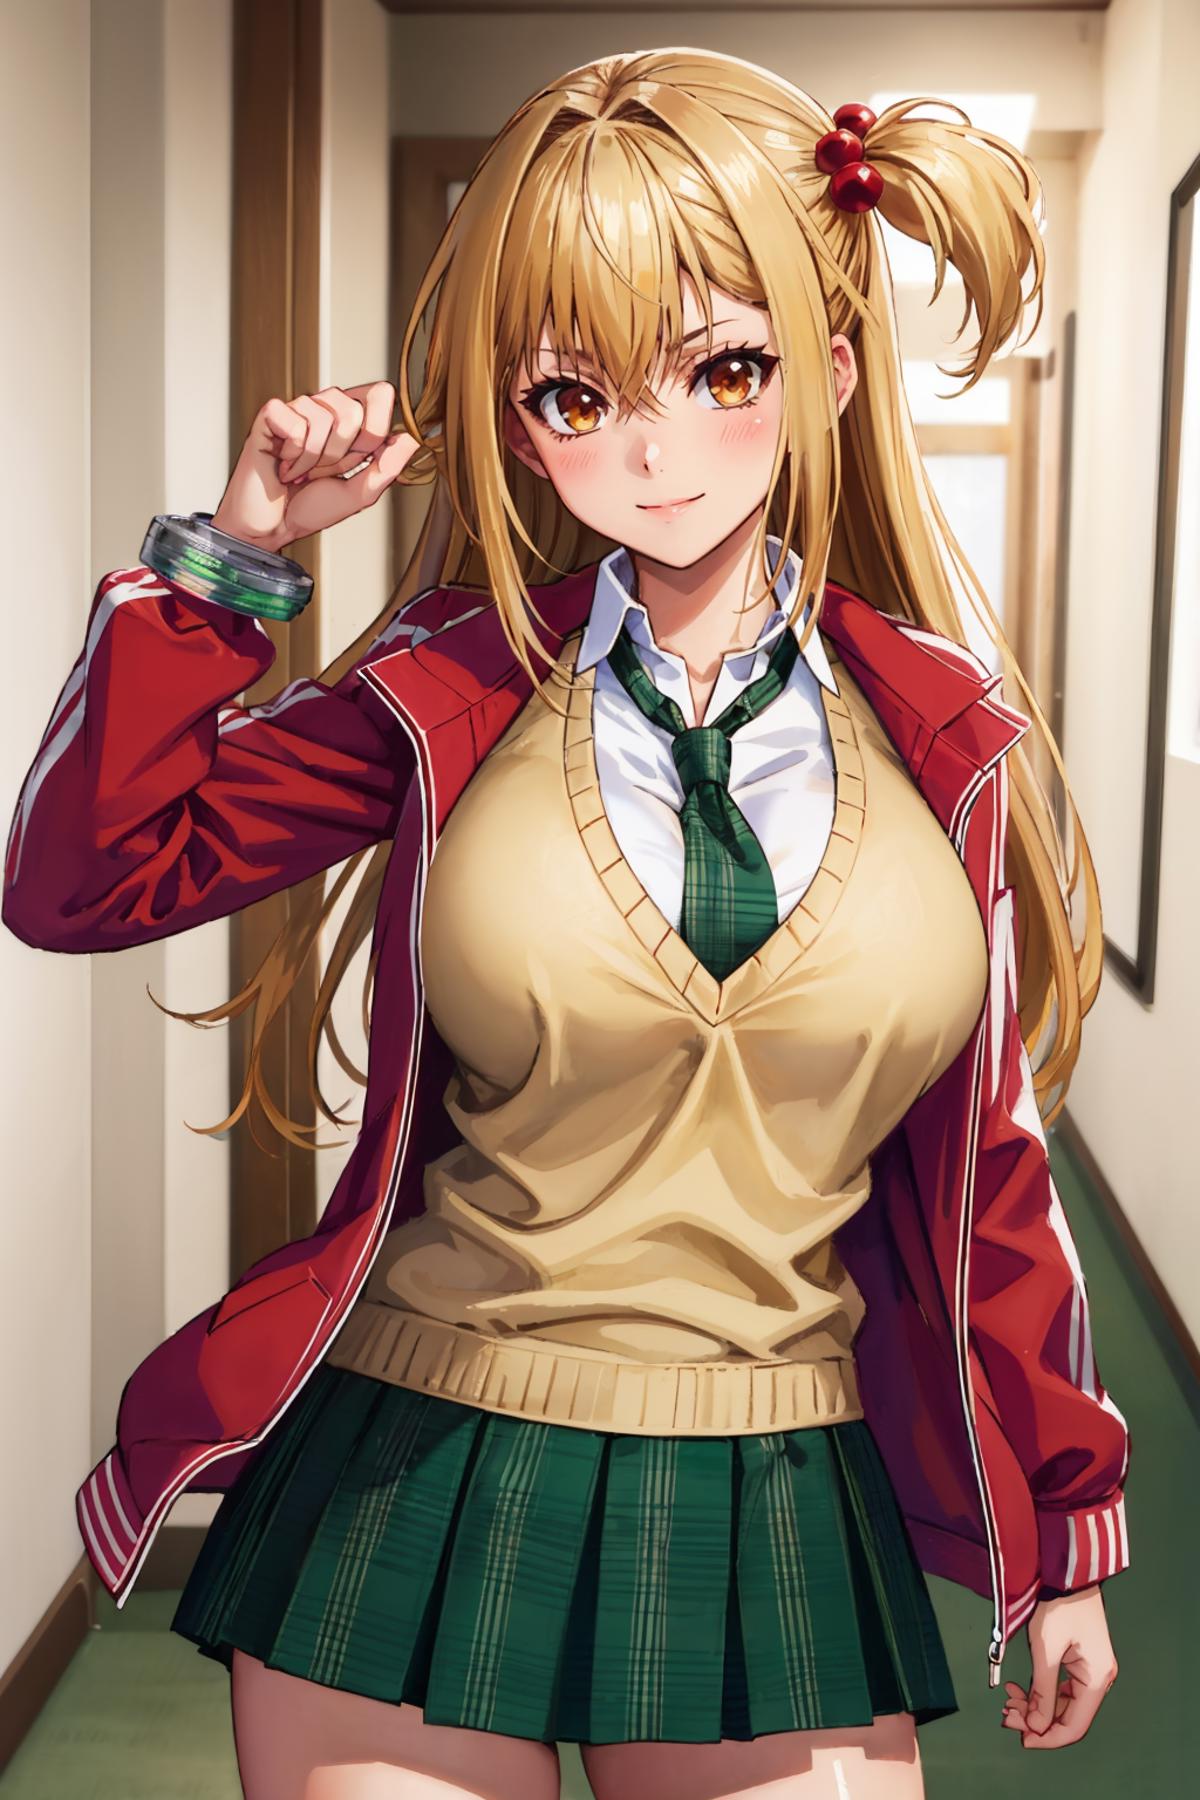 A cartoon image of a woman wearing a red jacket and a green tie.